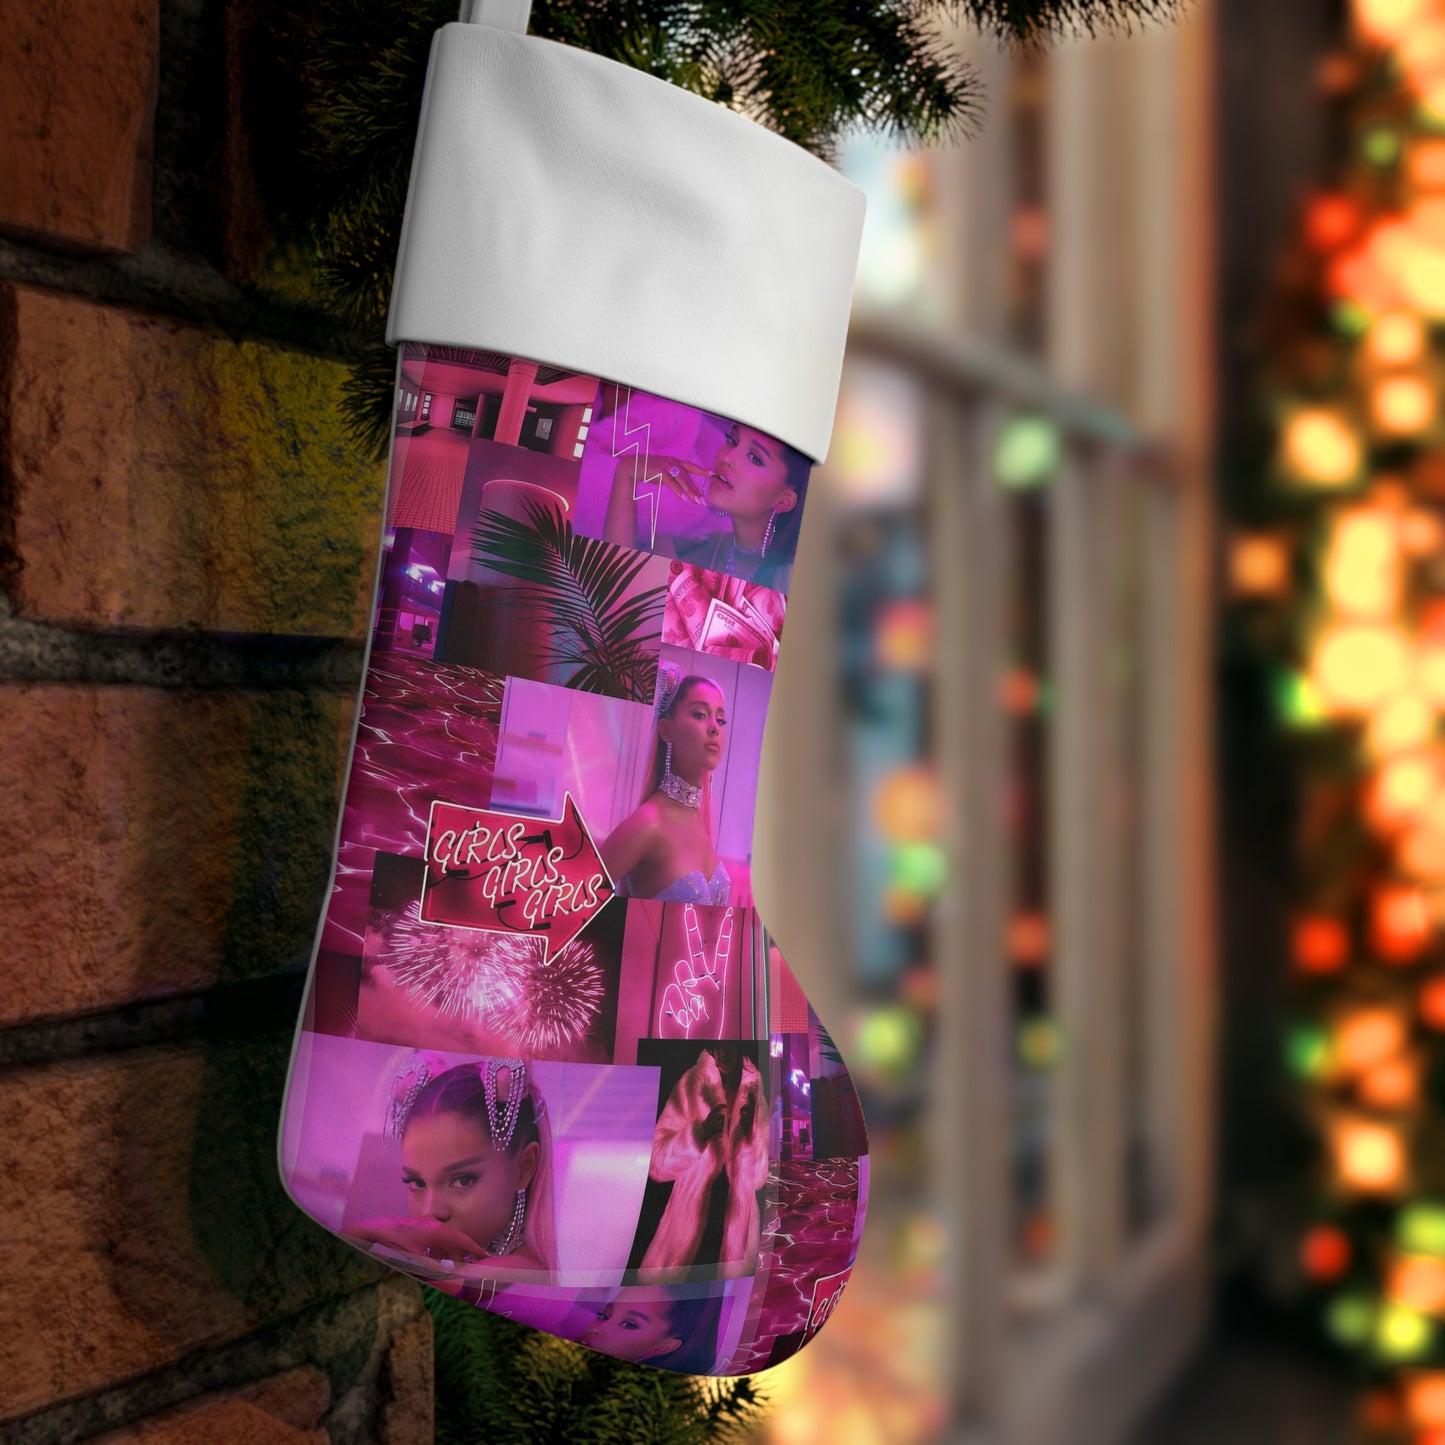 Ariana Grande 7 Rings Collage Christmas Holiday Stocking